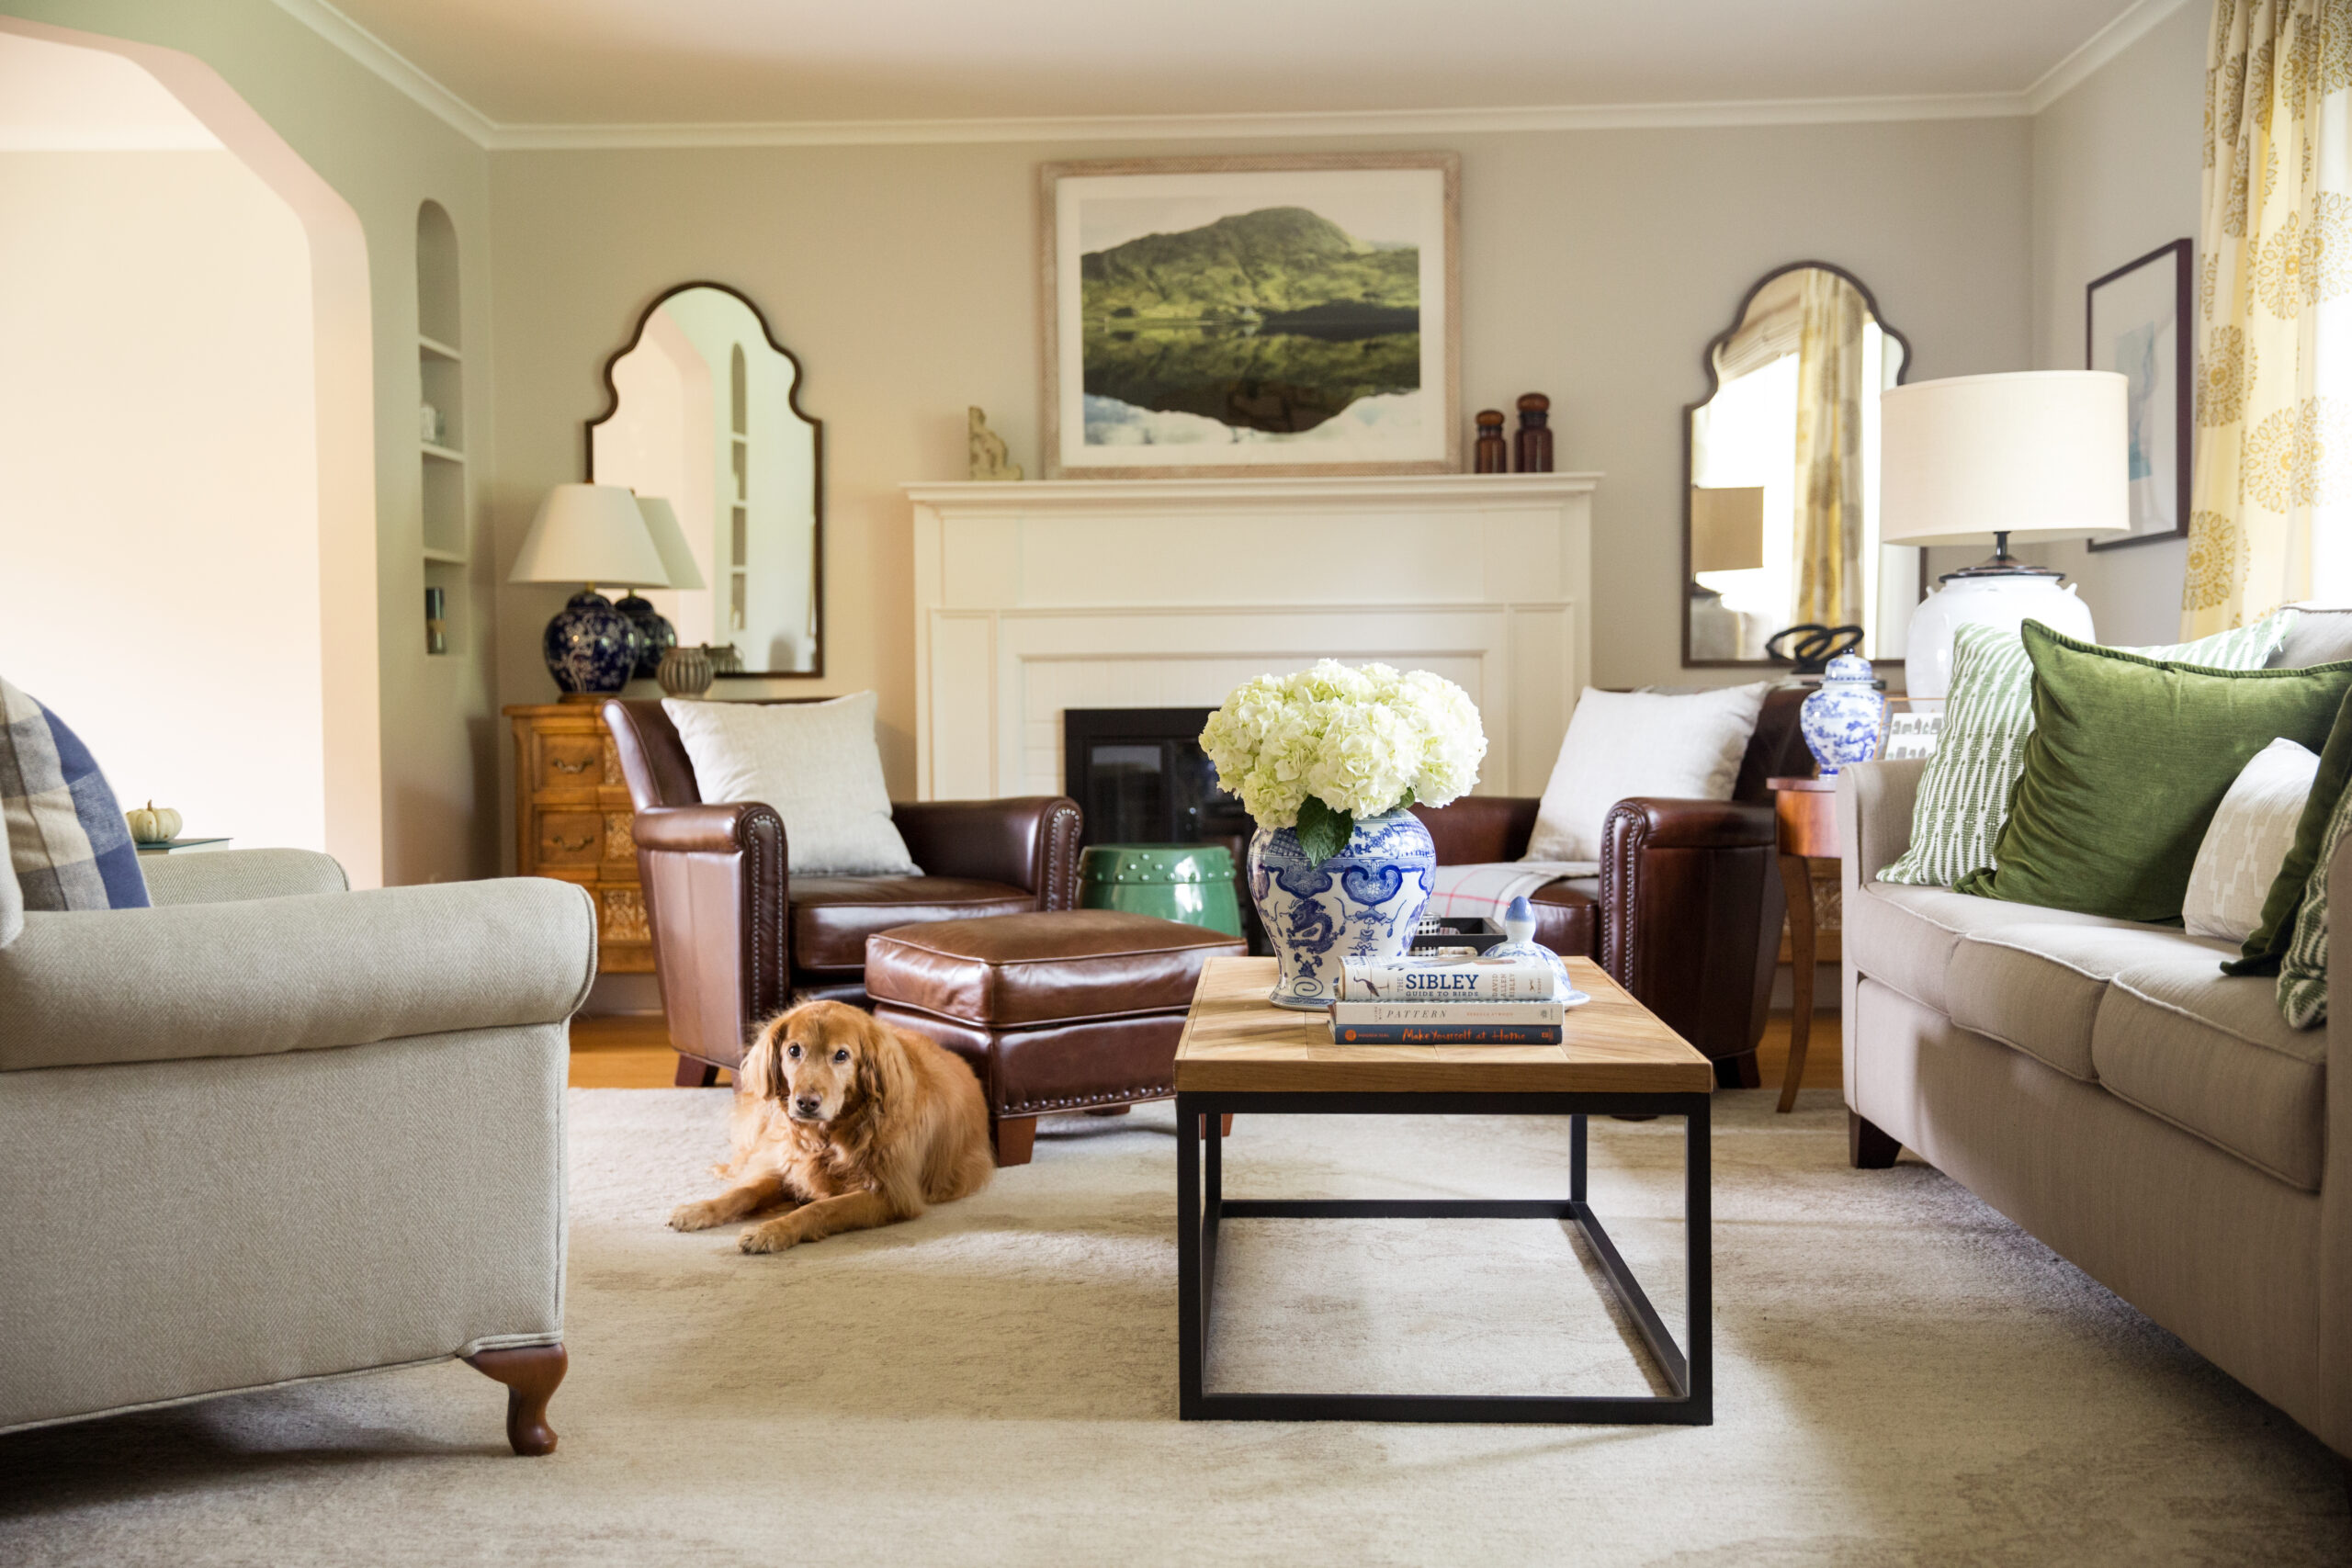 A living room with two large mirrors and a dog laying on the floor.